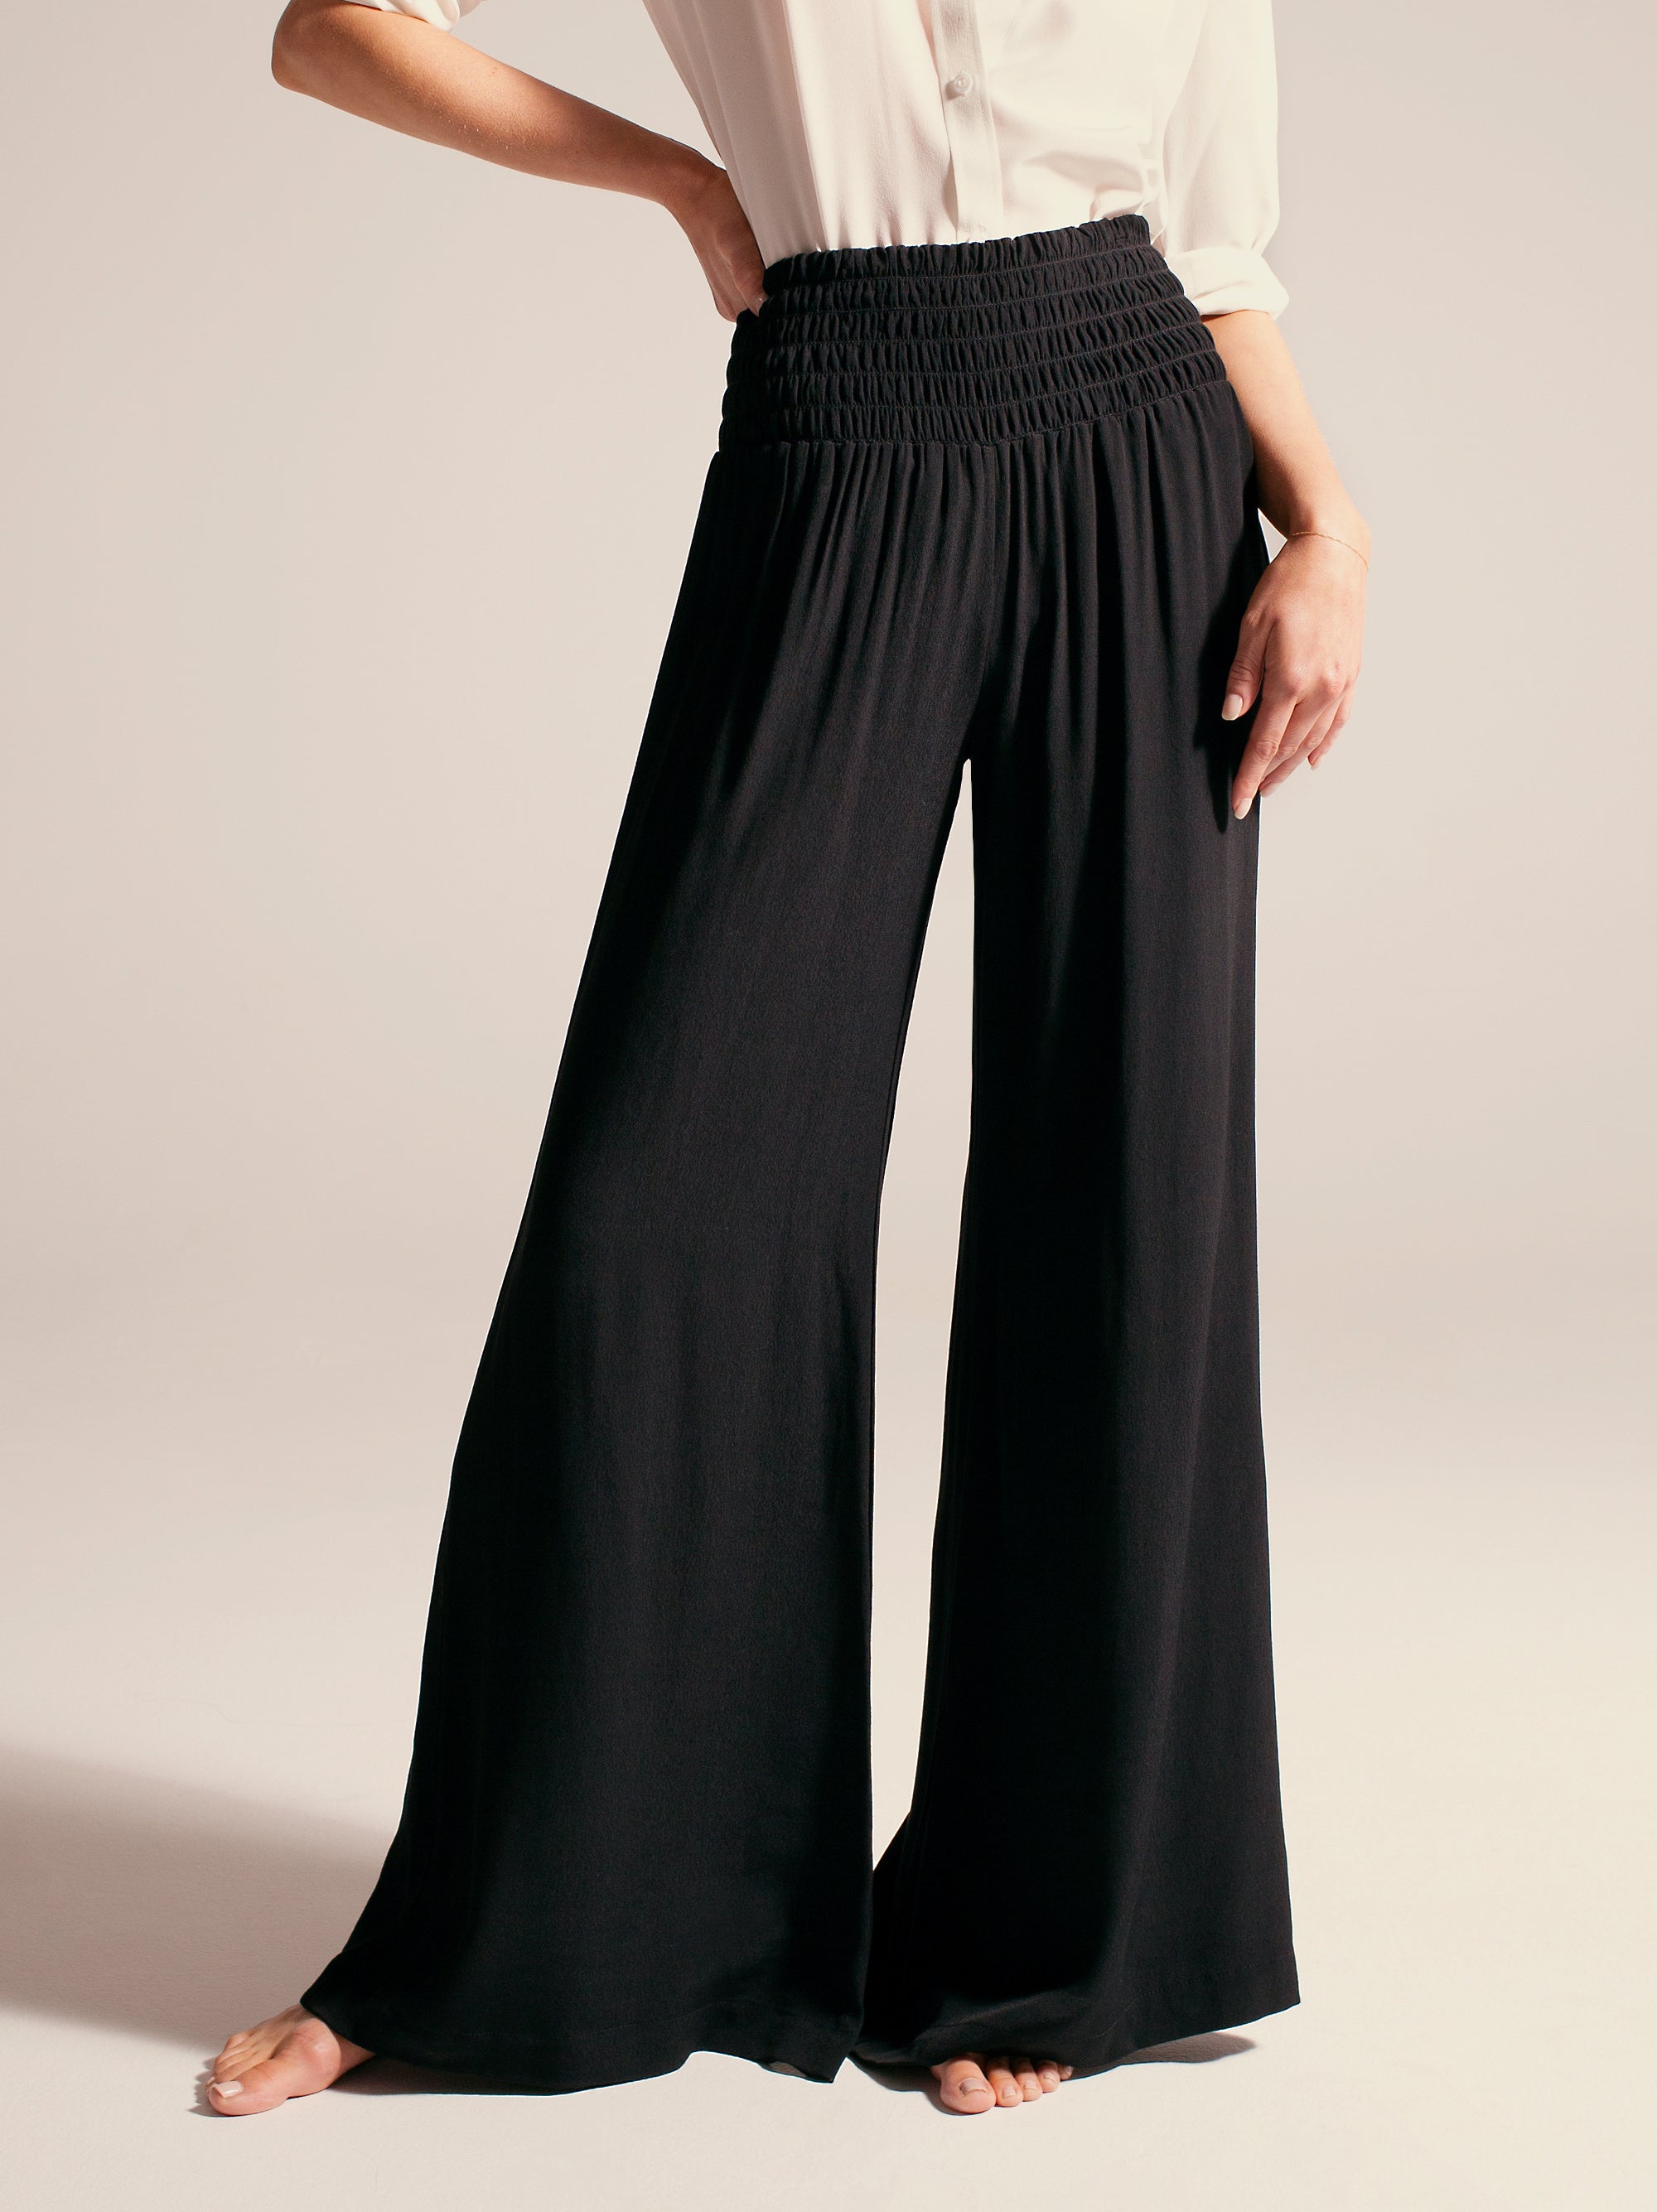 Vacation in a pant: DIANA Wide Leg